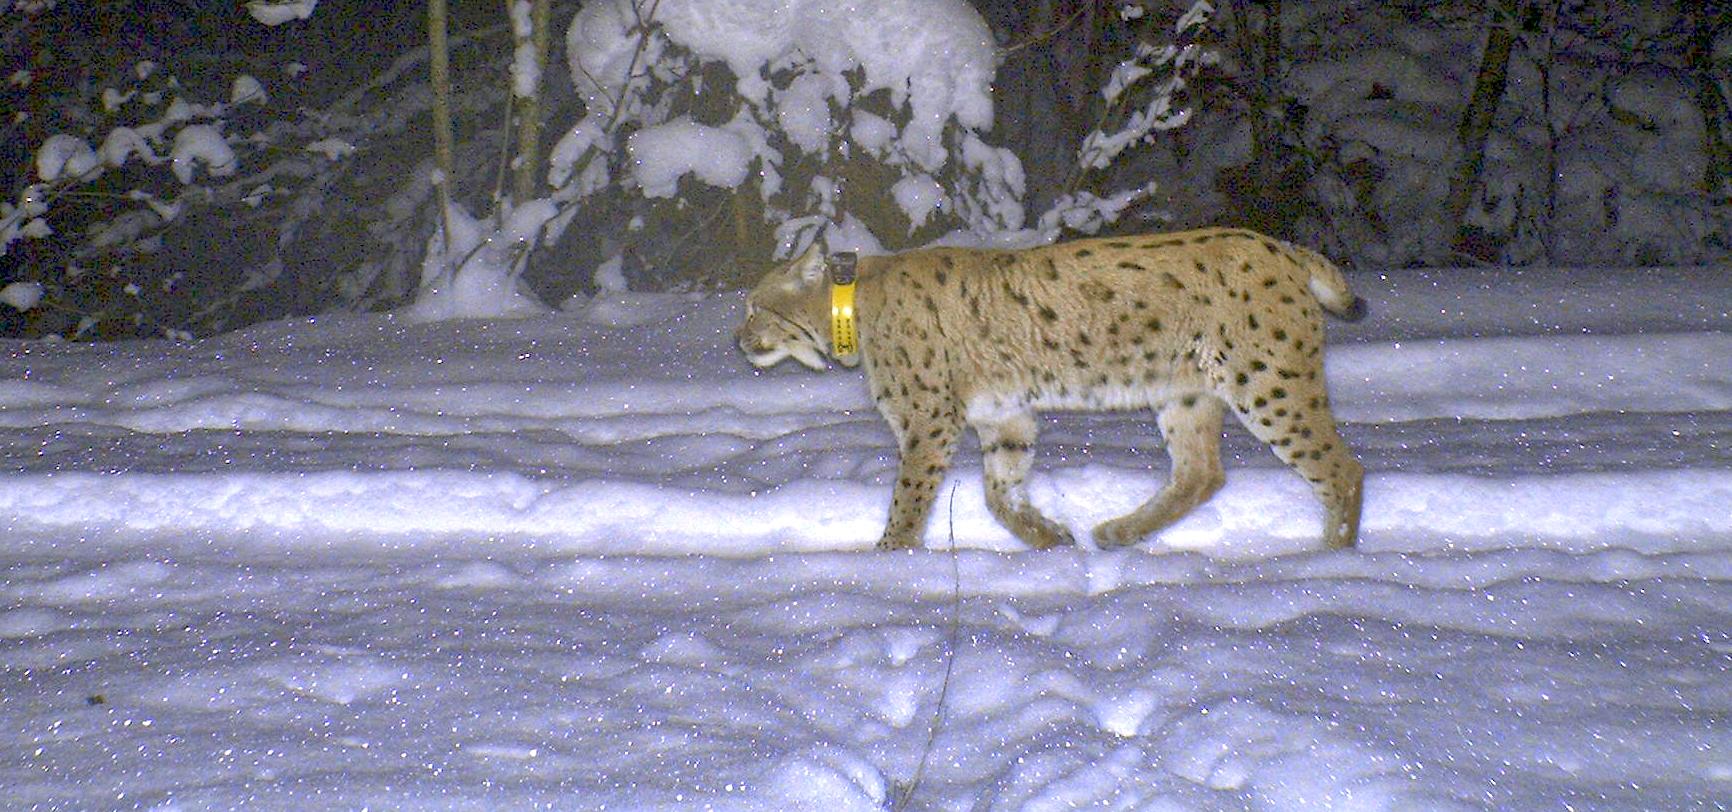 Night-time photo trap image shows a lynx running along a snow-covered path